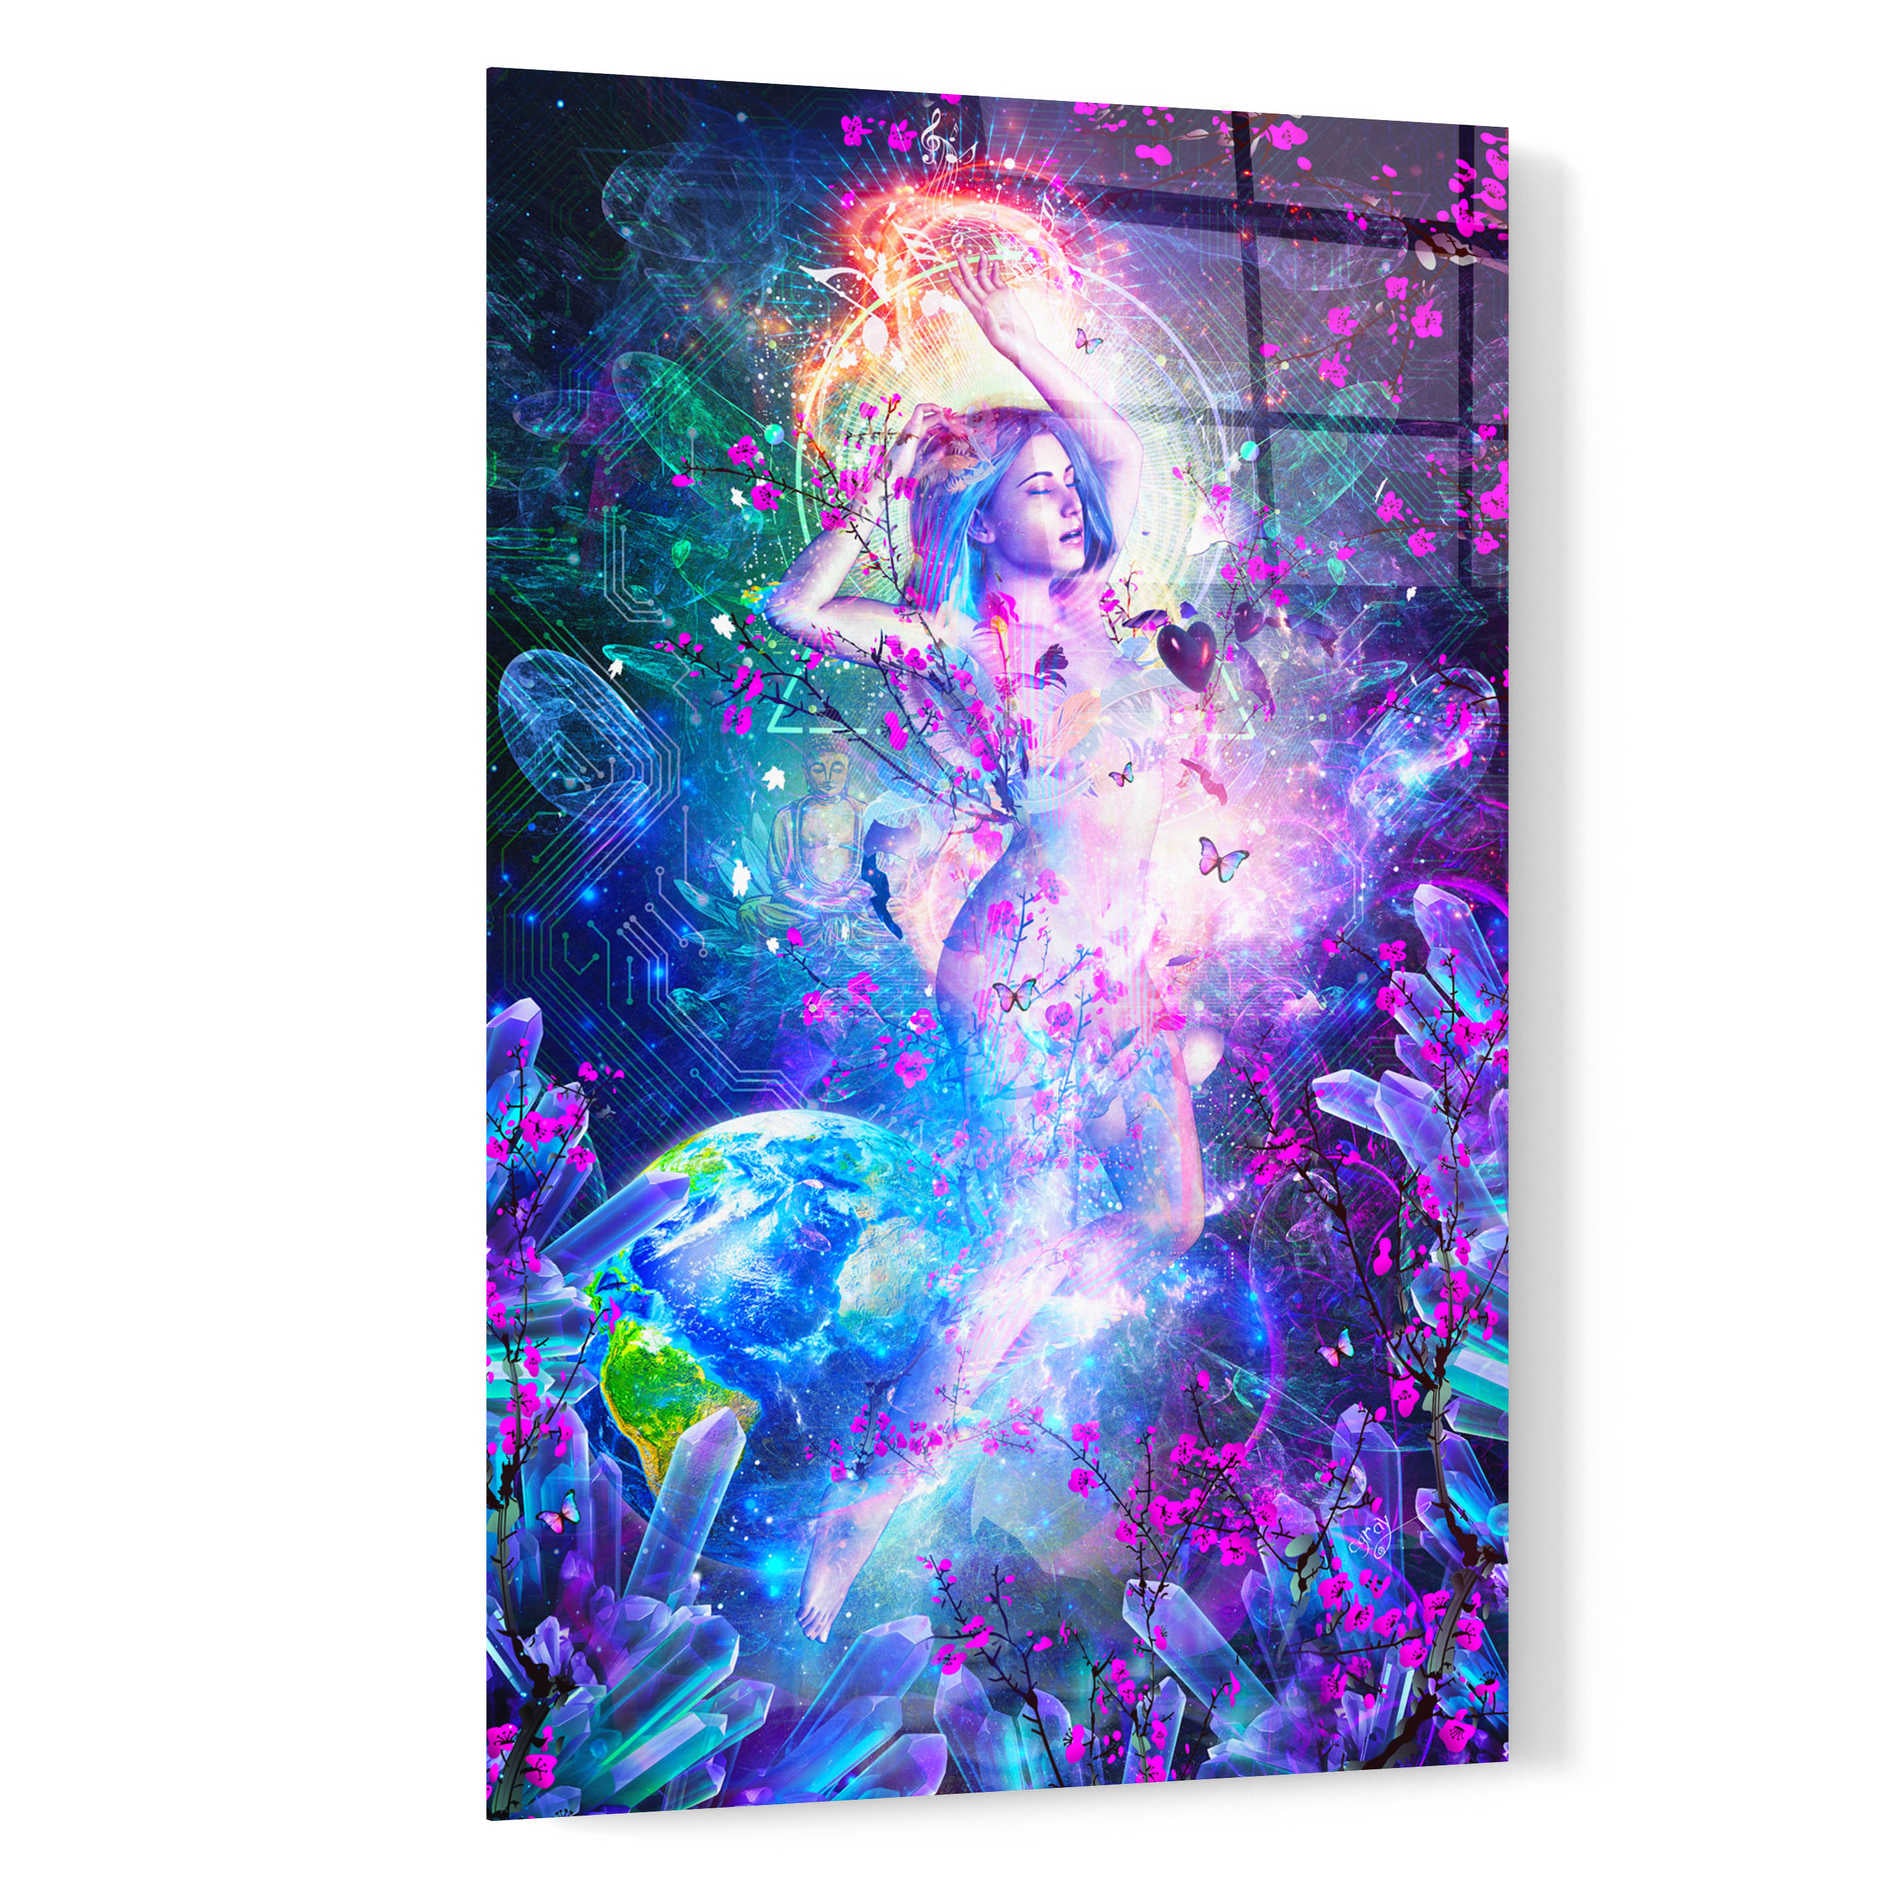 Epic Art 'Encounter With The Sublime' by Cameron Gray, Acrylic Glass Wall Art,16x24